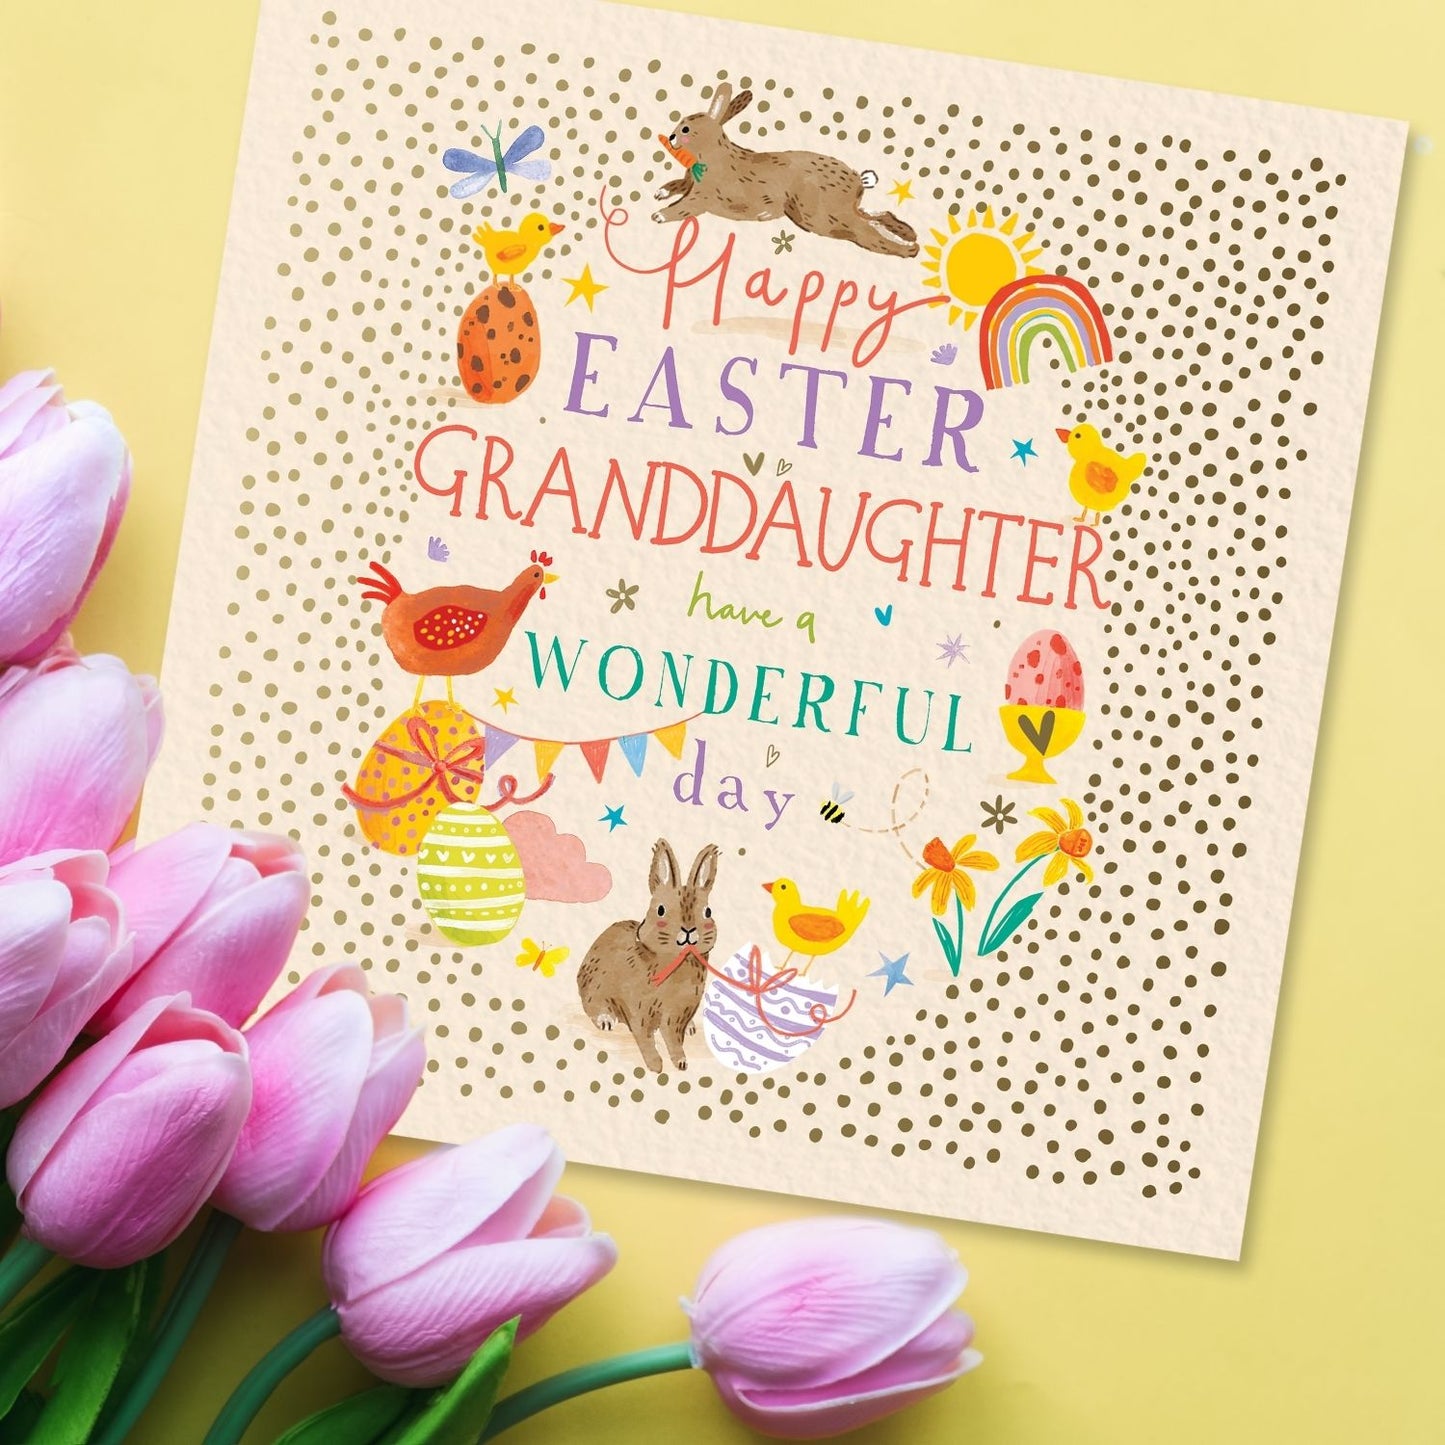 Happy Easter Granddaughter Eggscellent Bunnies Artistic Easter Greeting Card